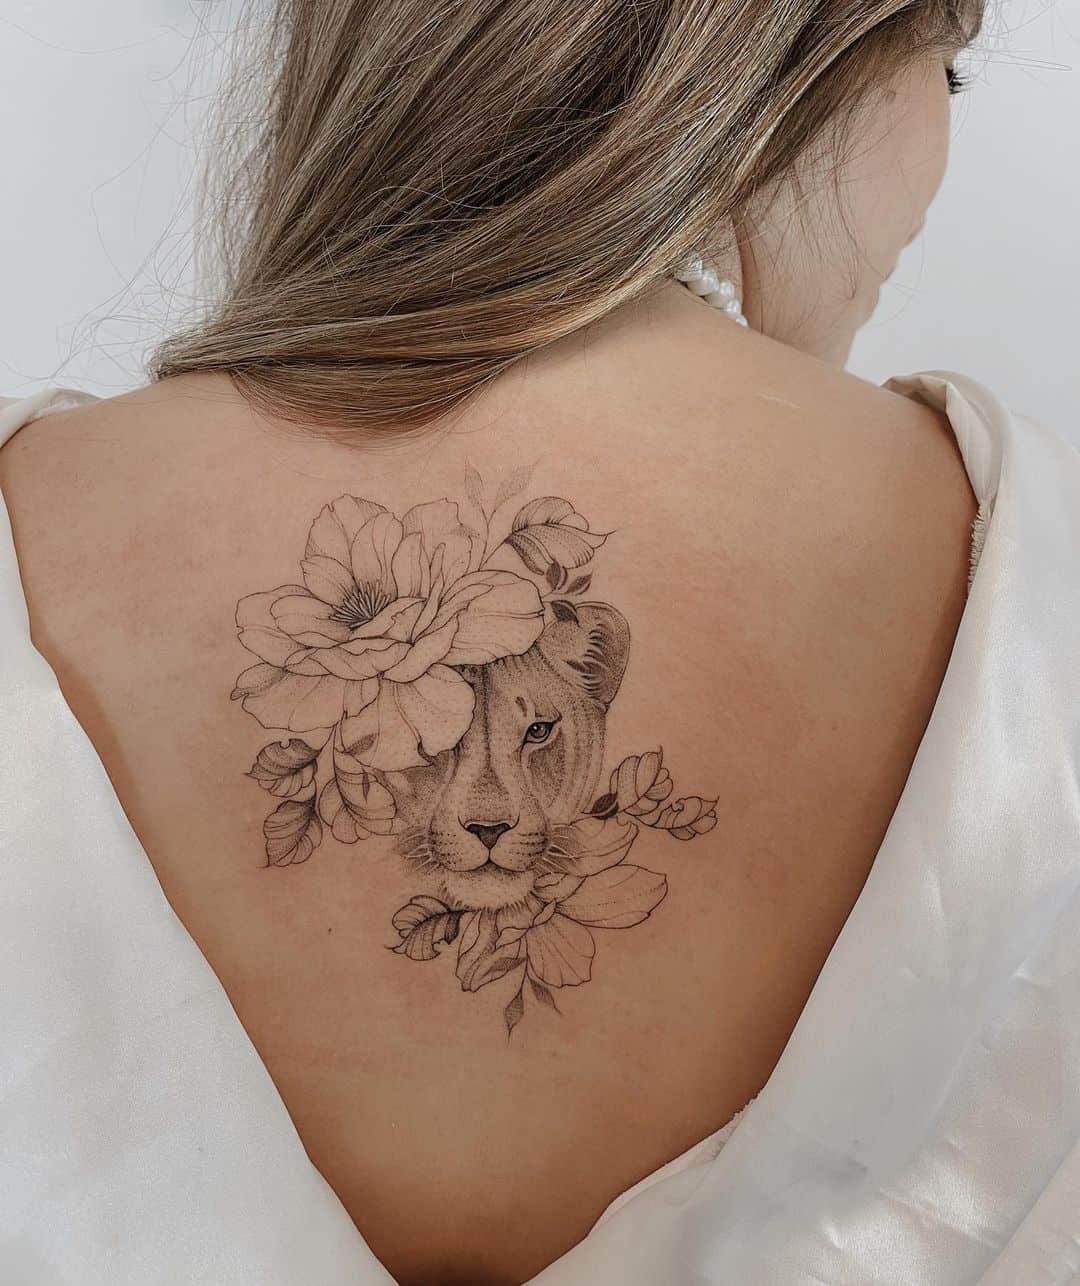 Amazing lioness tattoo with flower on back by sharon tattoos